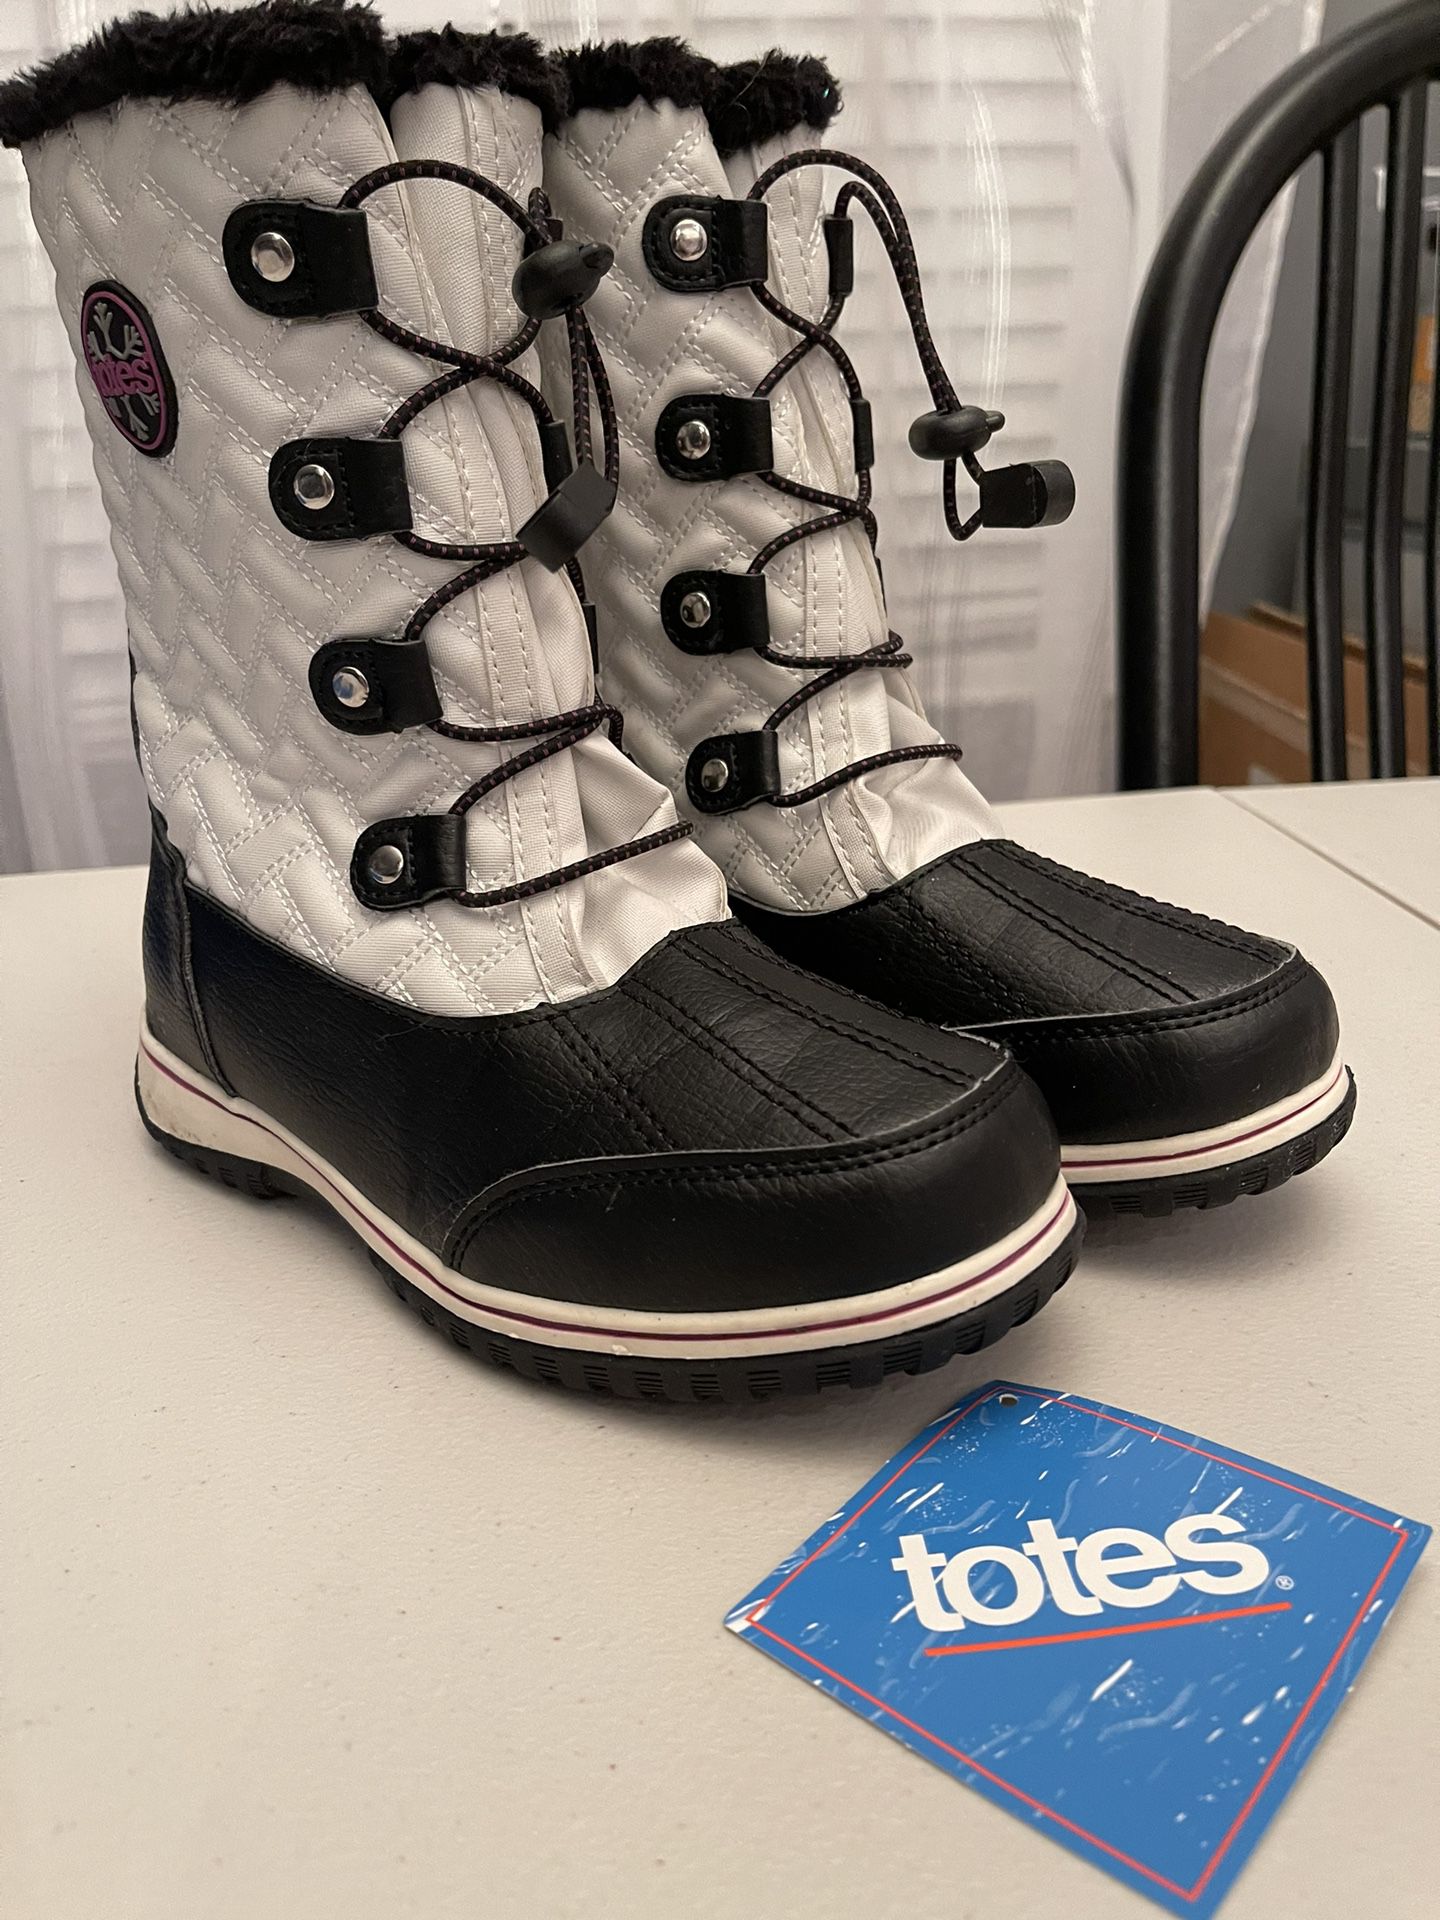 $25 New with tags Totes Snow Boots big kids size 5M Pickup Hazlet NJ